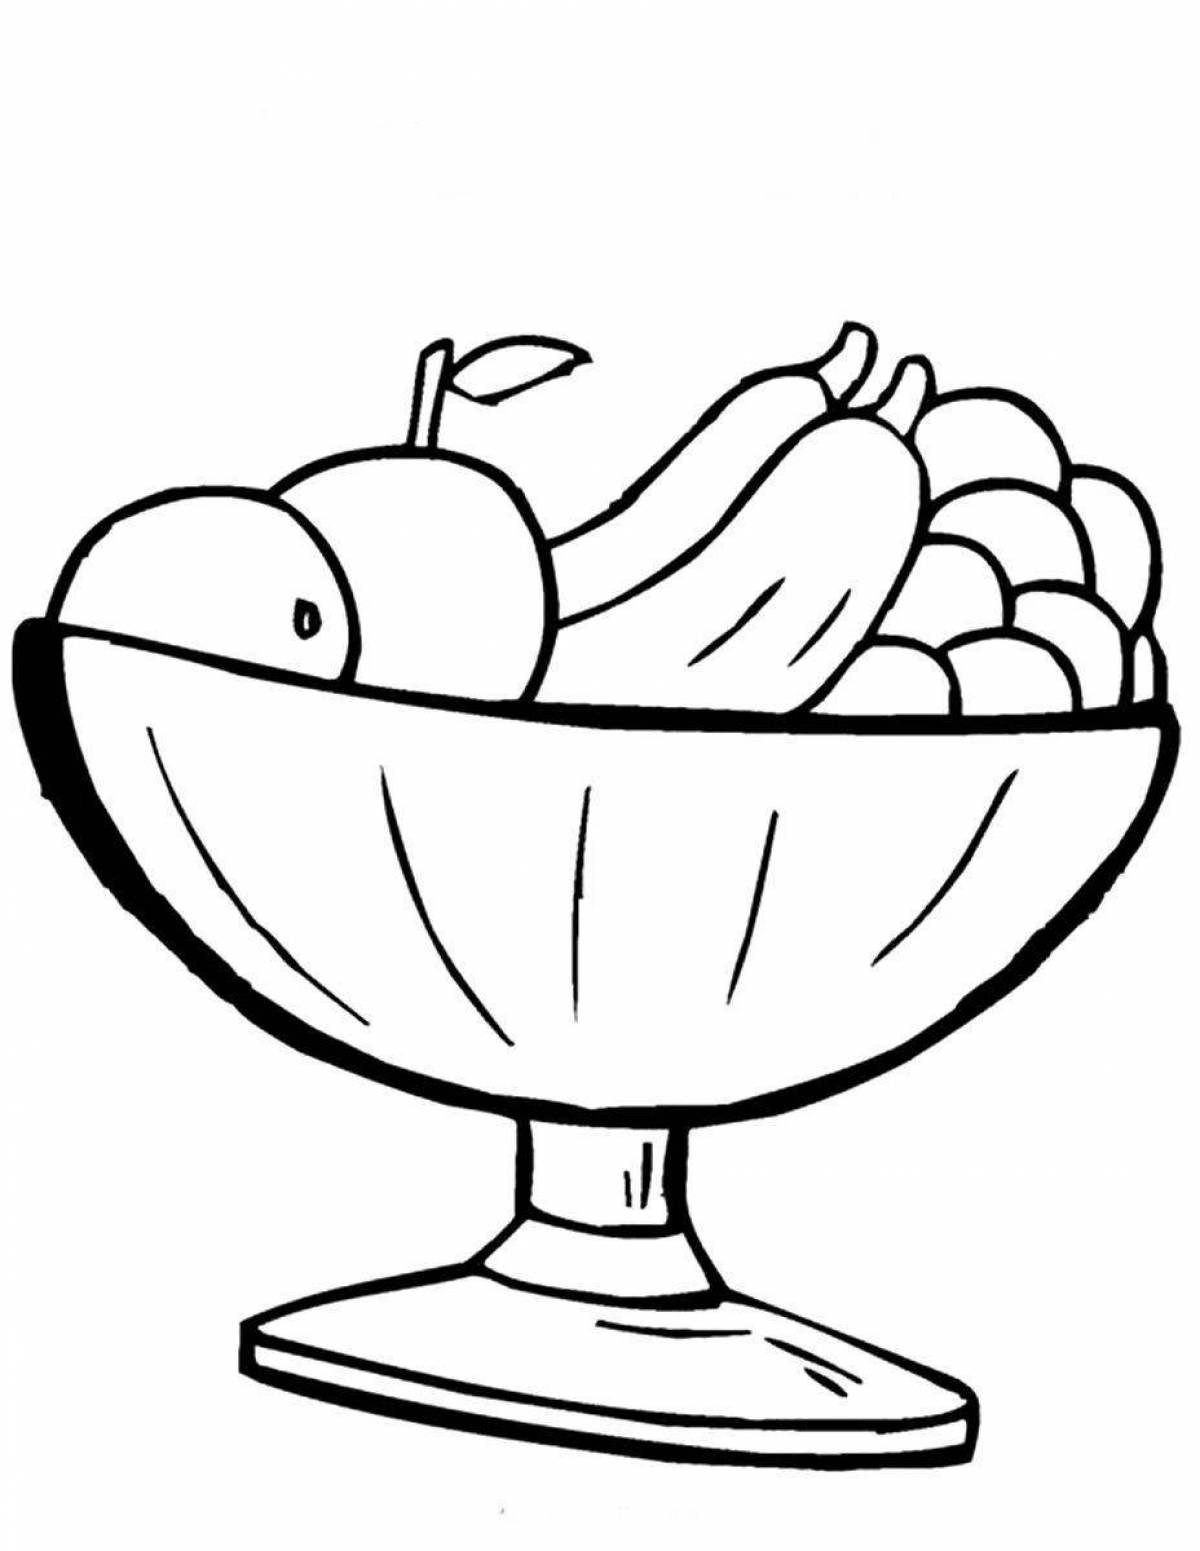 Coloring page nice bowl